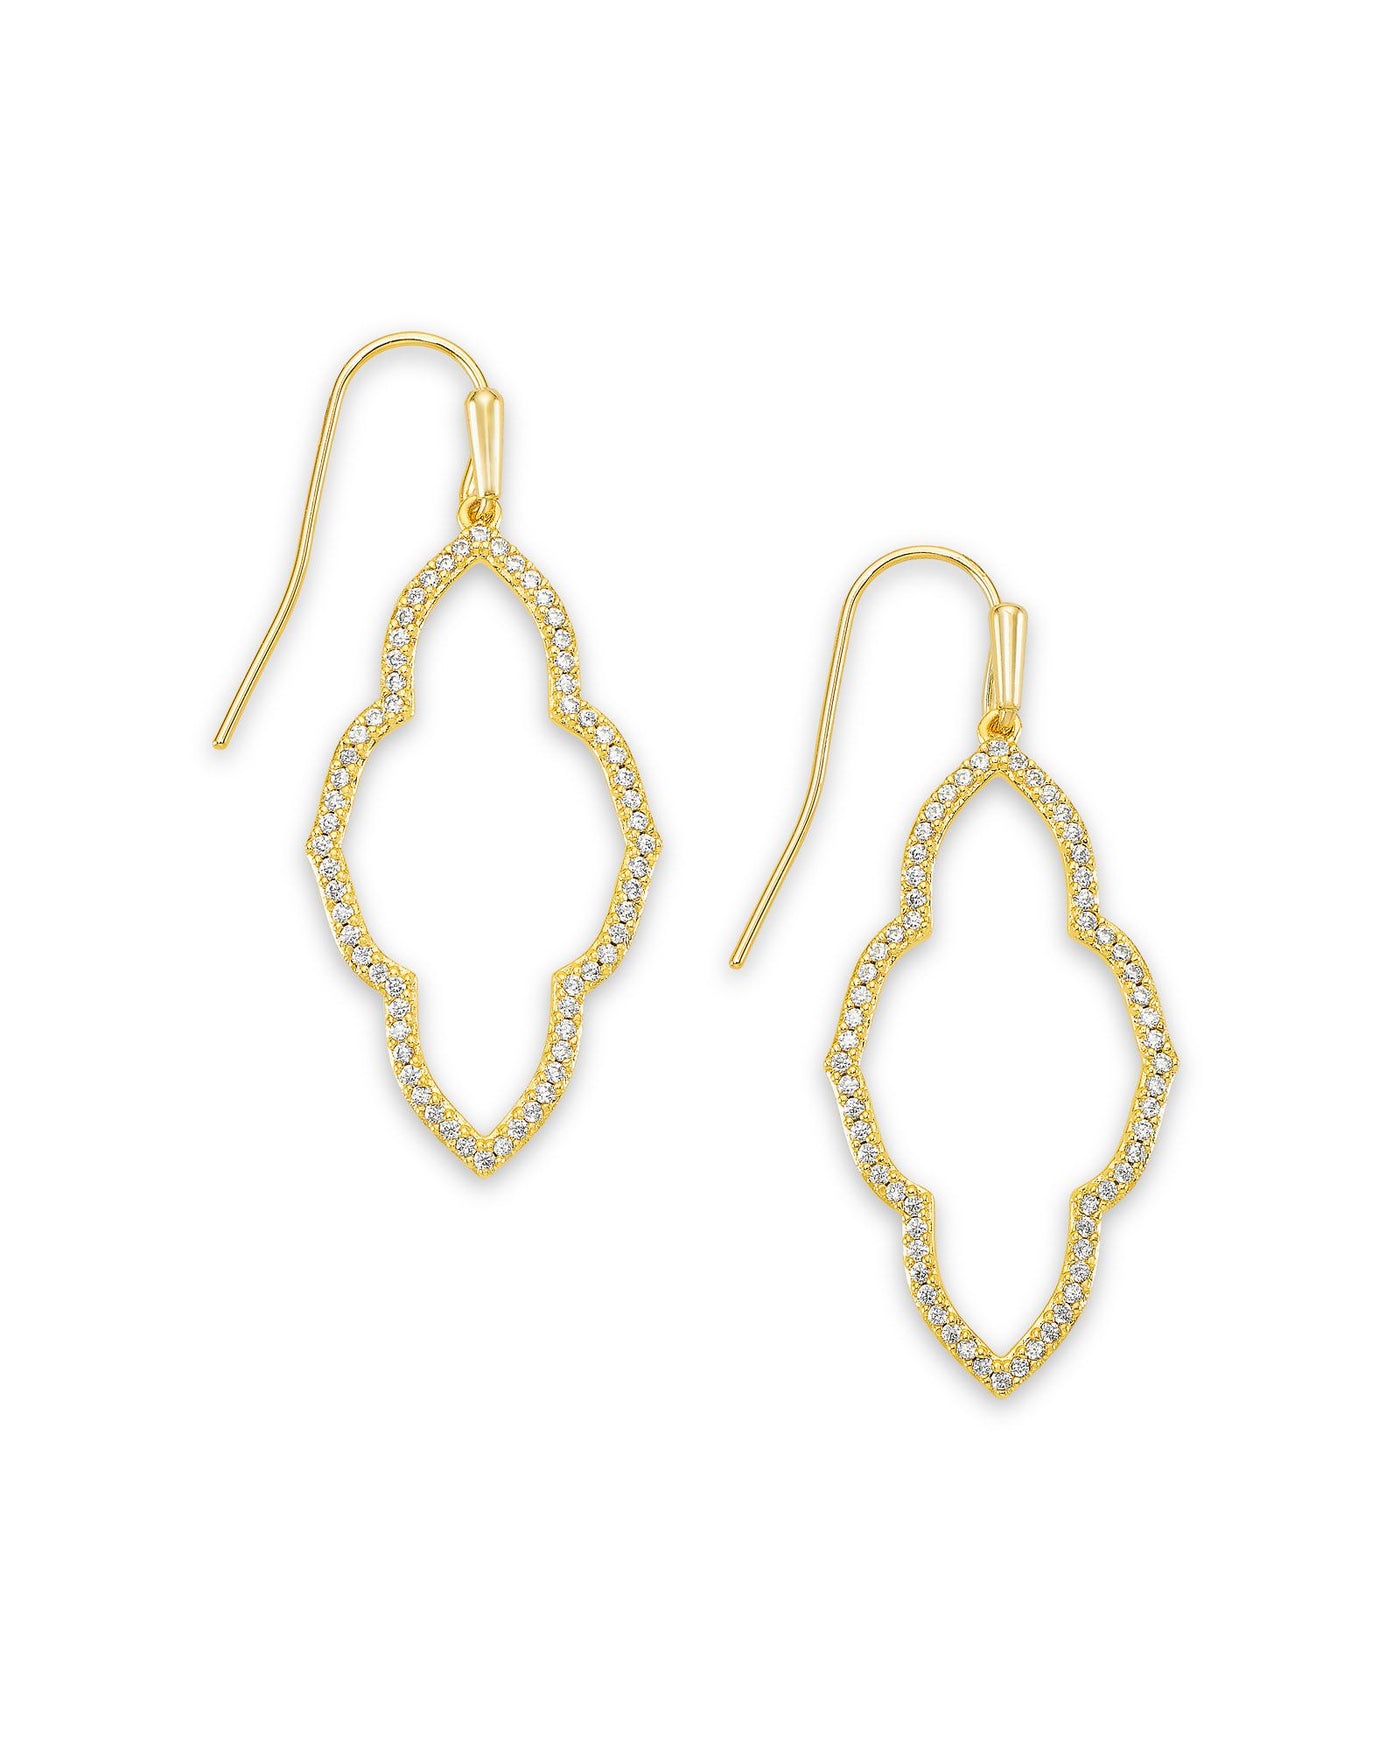 Kendra Scott Abbie Small Open Frame Earrings Gold Metal-Earrings-Kendra Scott-Market Street Nest, Fashionable Clothing, Shoes and Home Décor Located in Mabank, TX